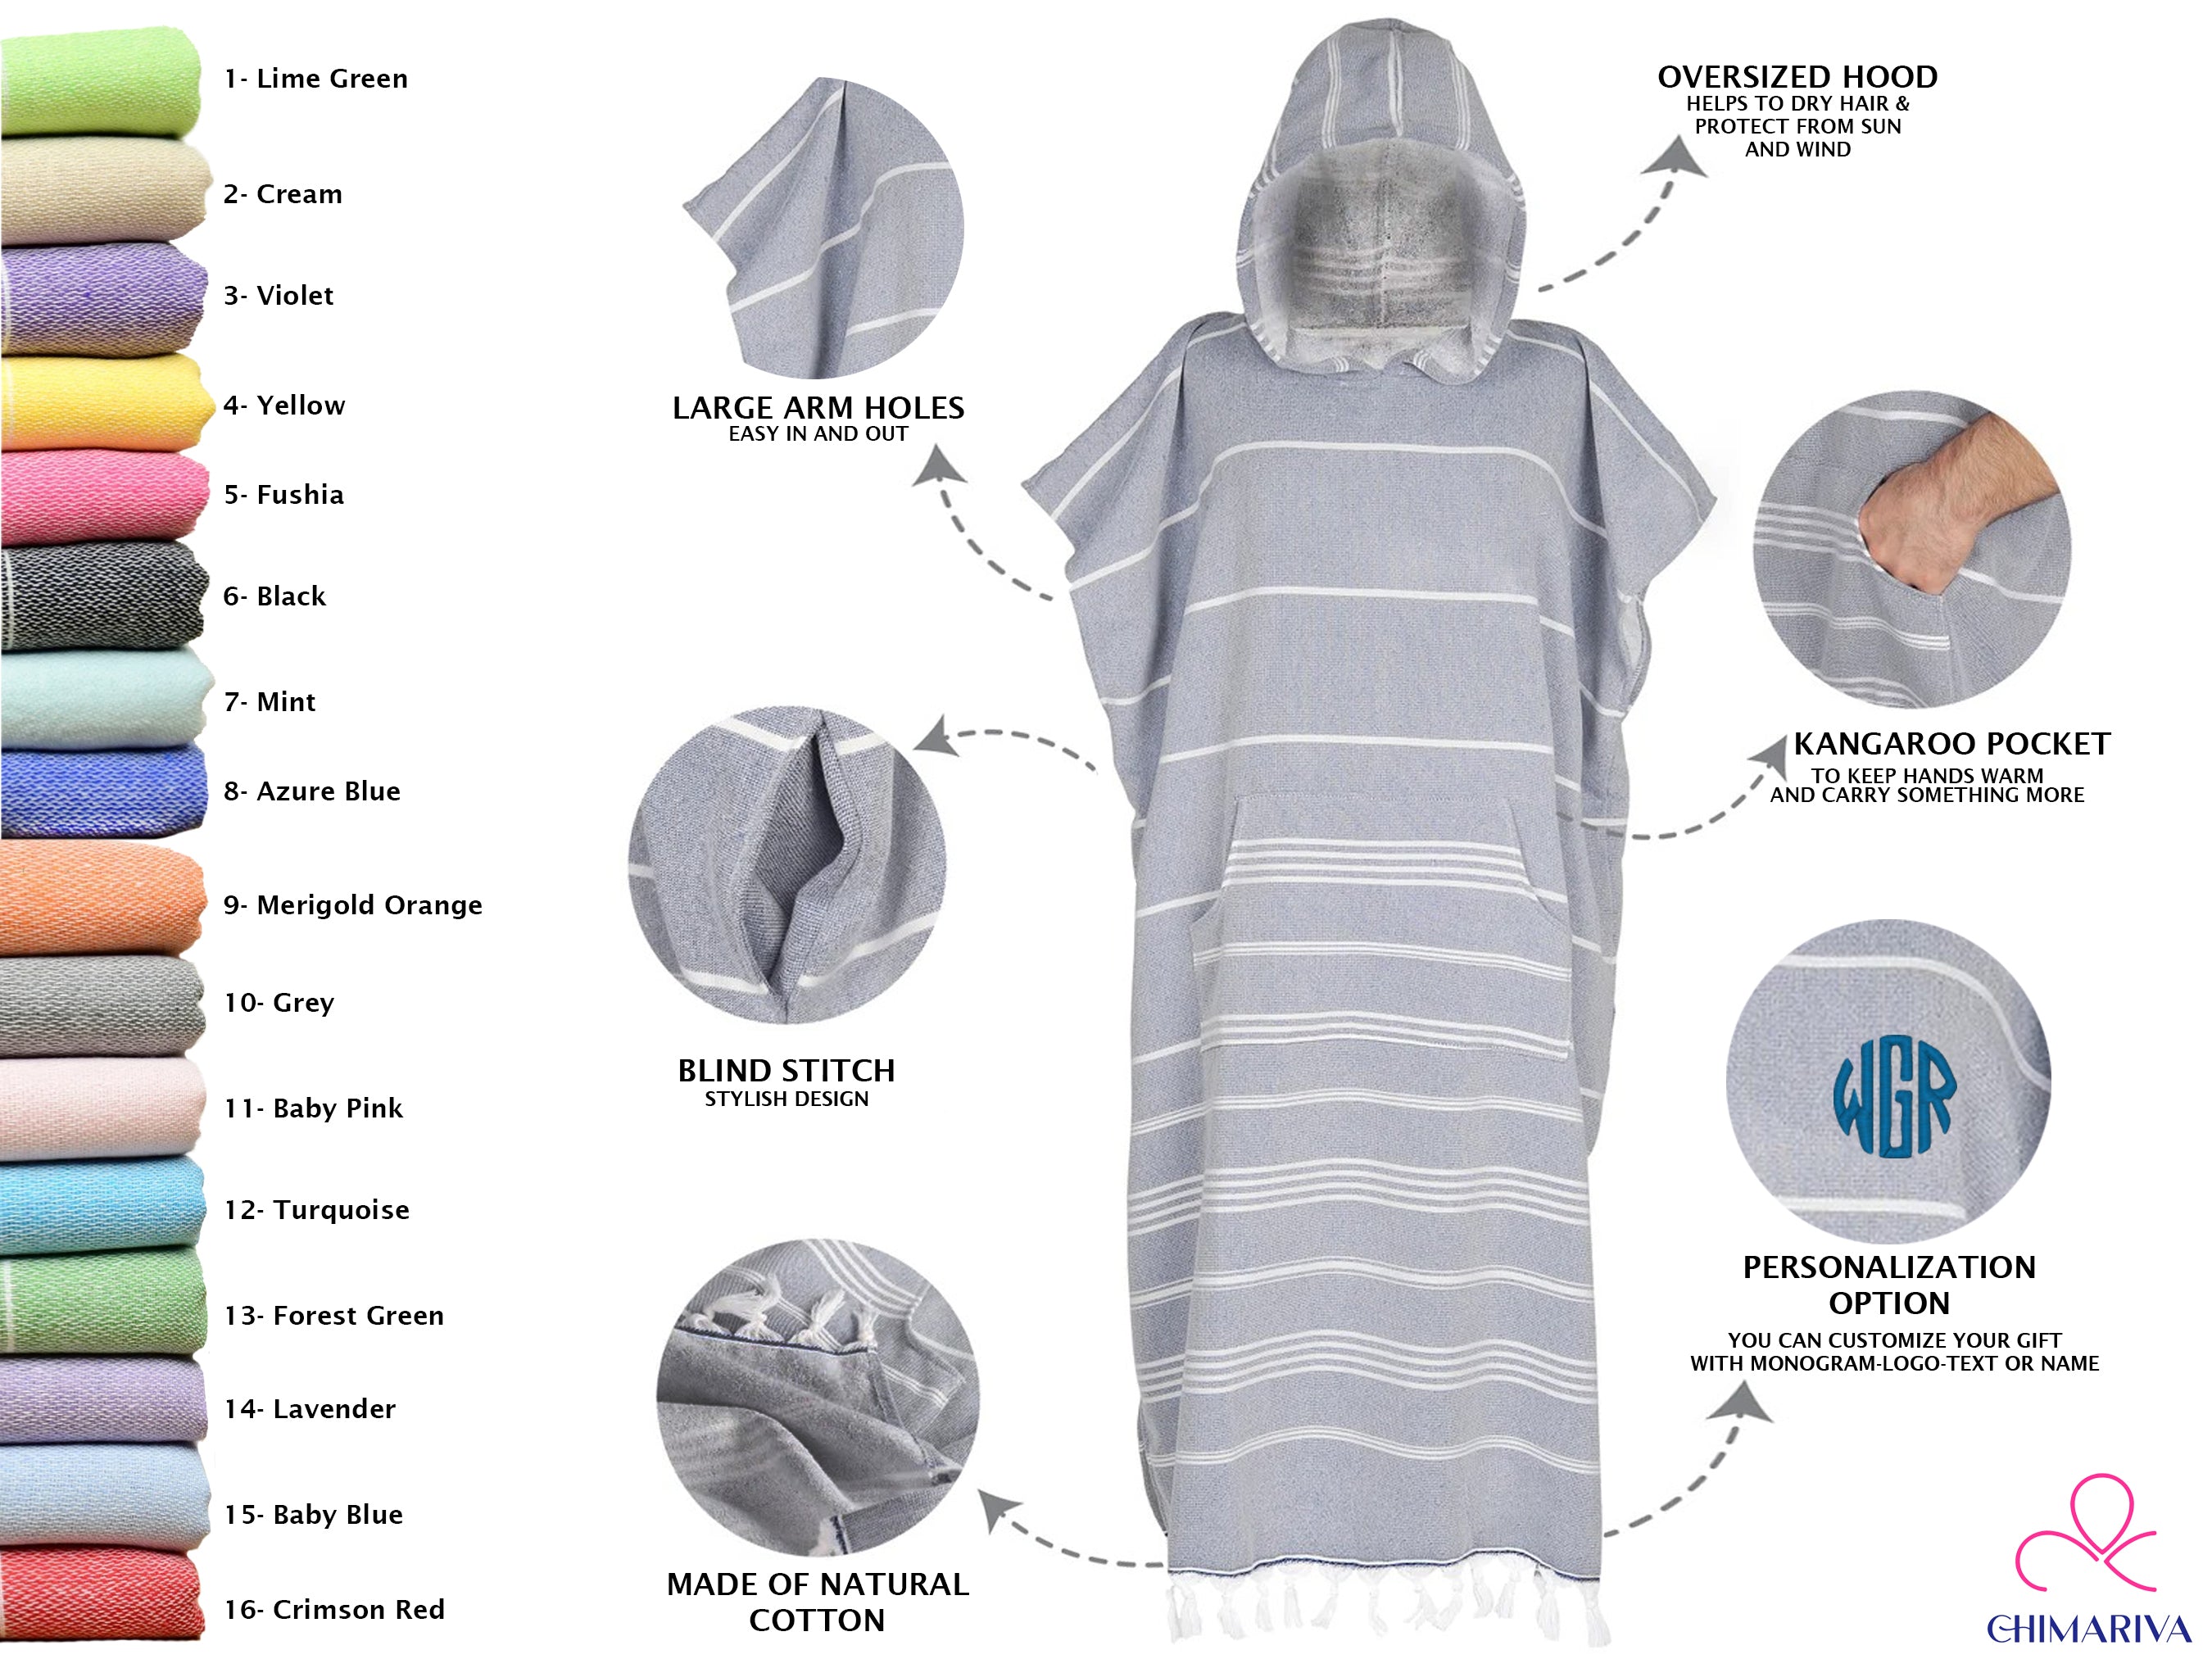 Custom Hooded Poncho for Kids, Beach Cover-up